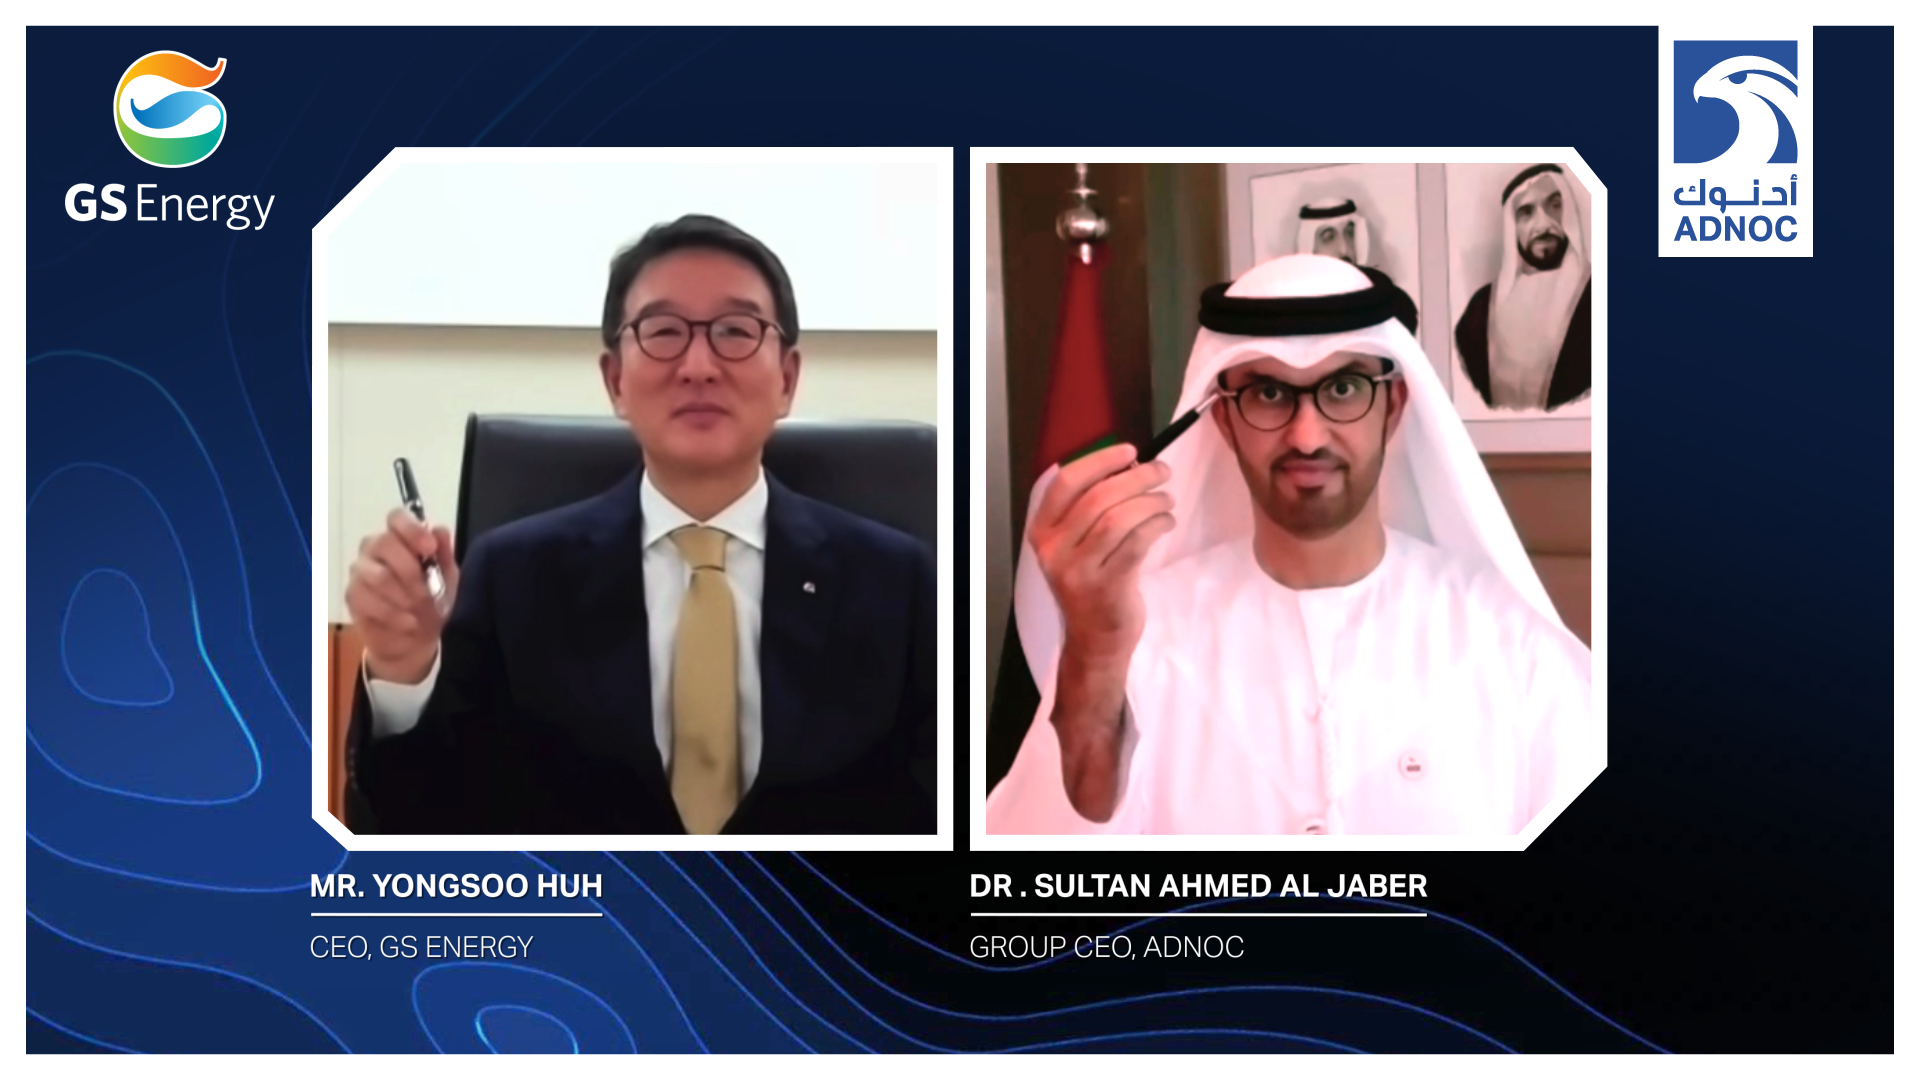 Image for ADNOC, Korea’s GS Energy Explore Opportunities To Grow Abu Dhabi’s Hydrogen Economy